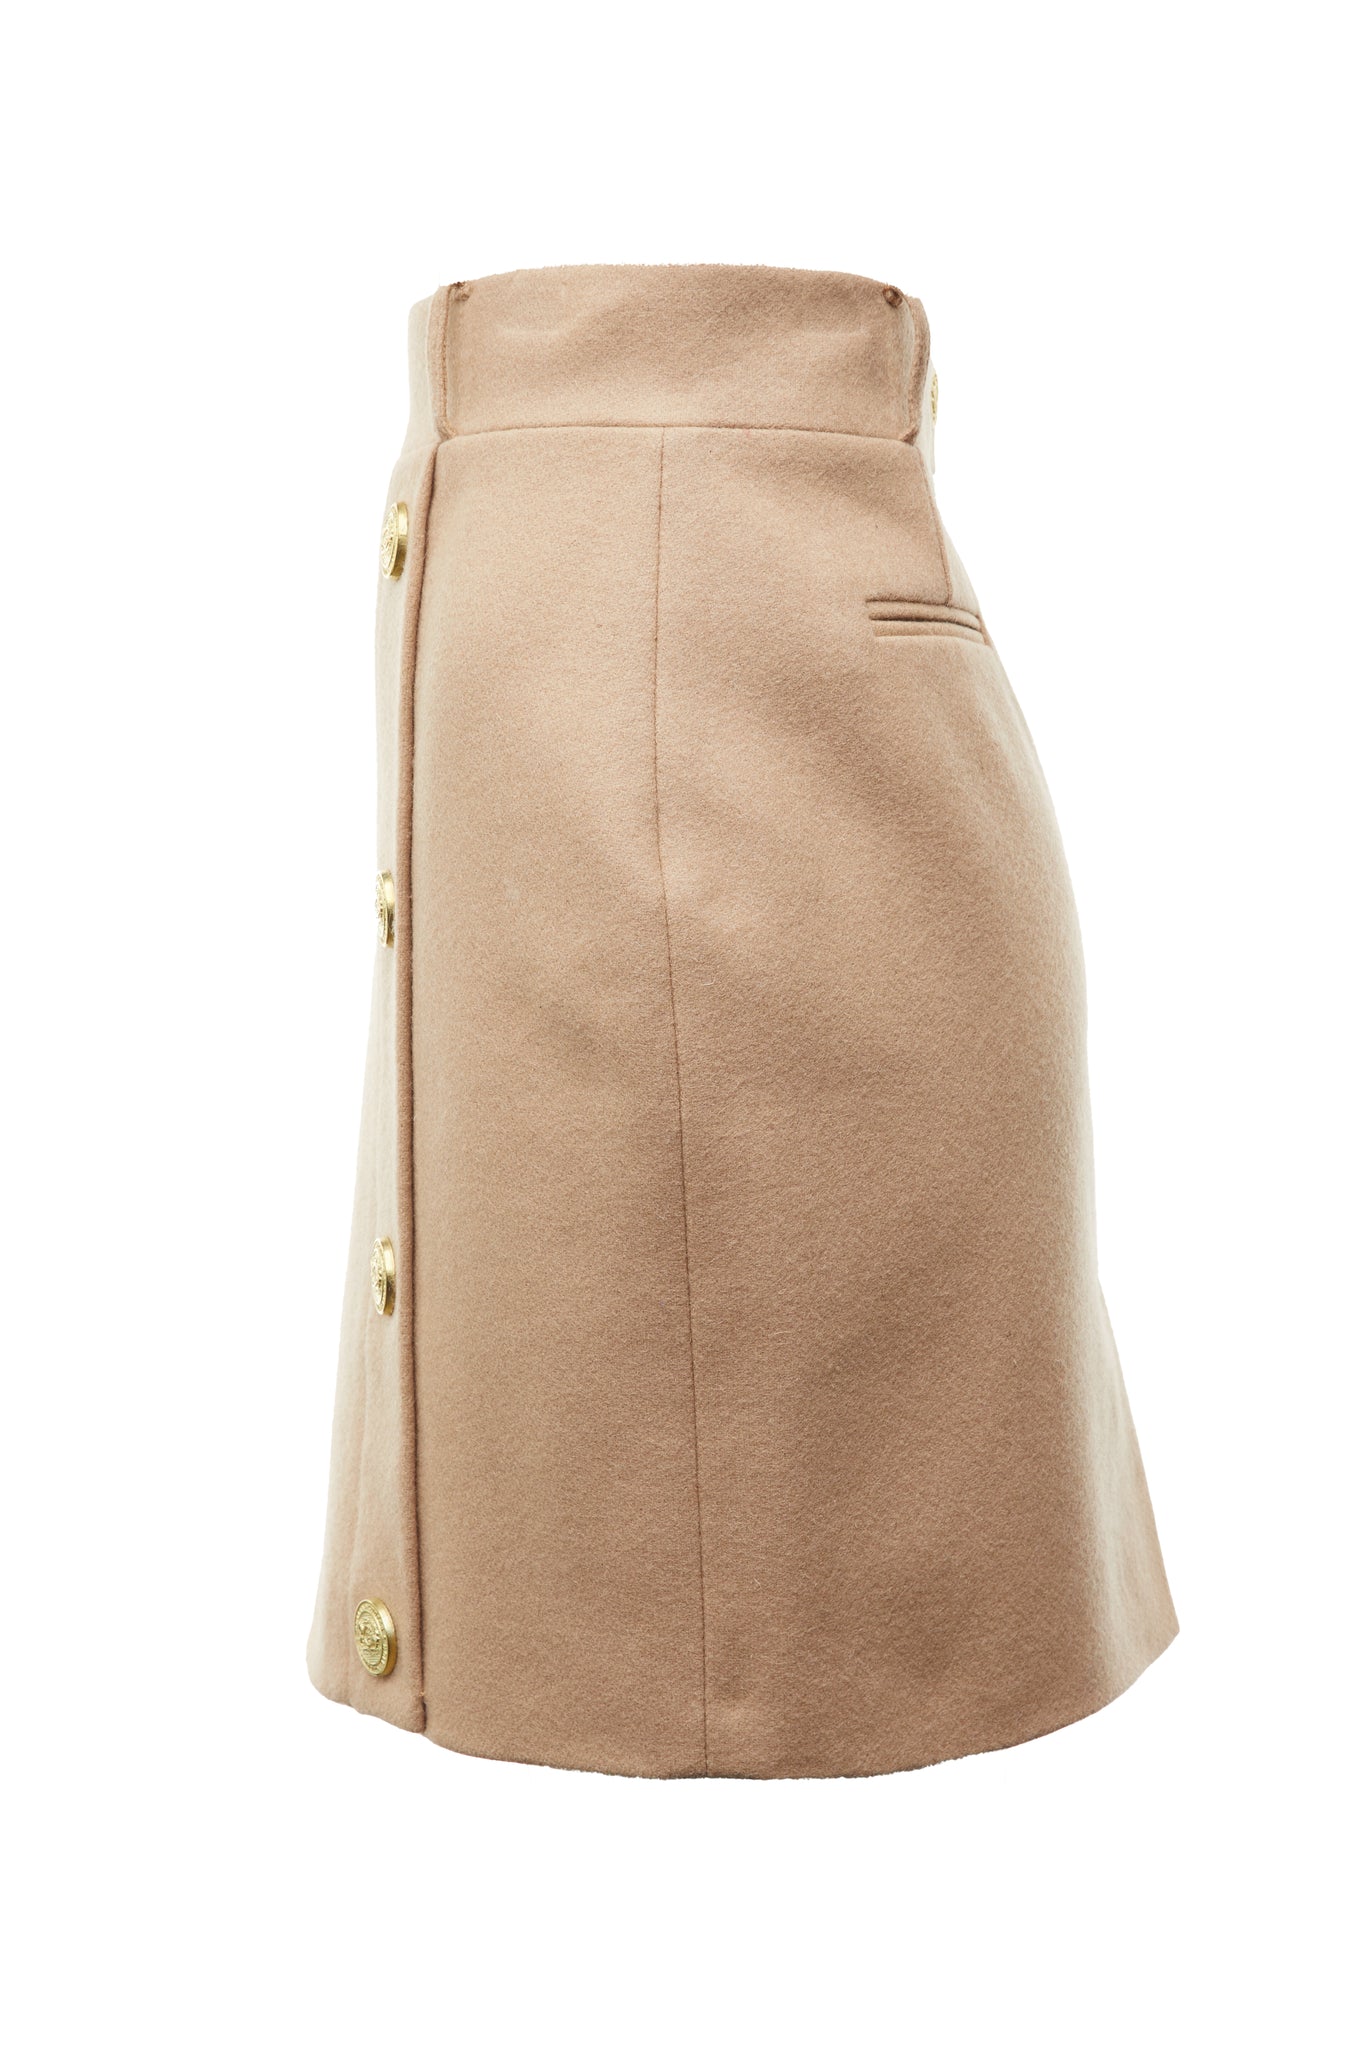 side of womens camel wool pencil mini skirt with concealed zip fastening on centre back and gold rivets down front